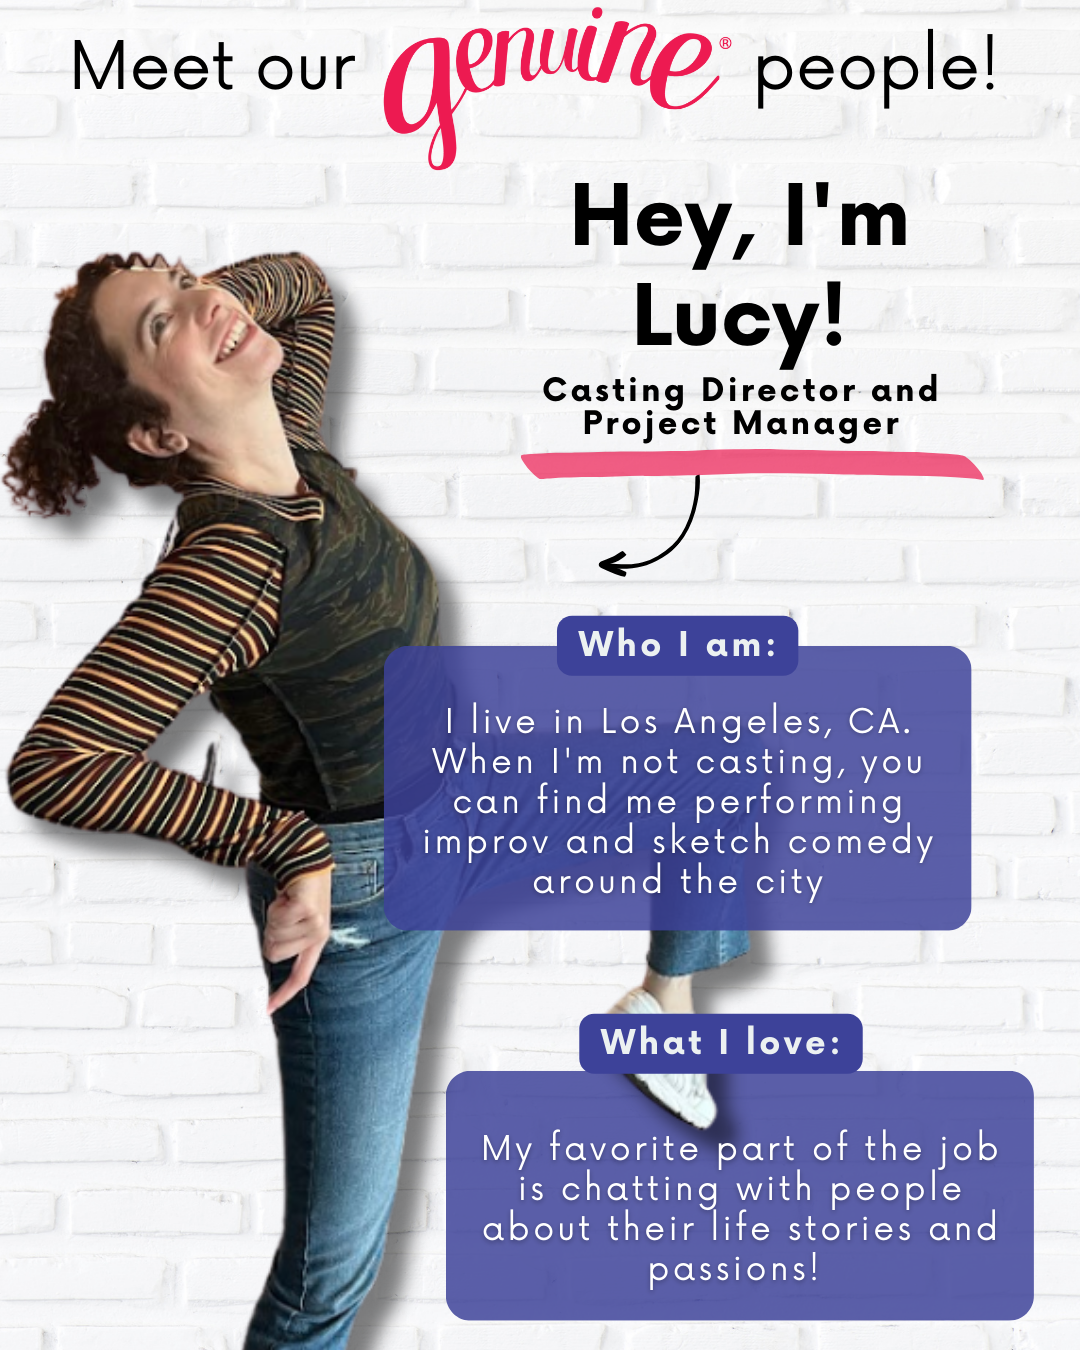 Meet Our Genuine People - Lucy